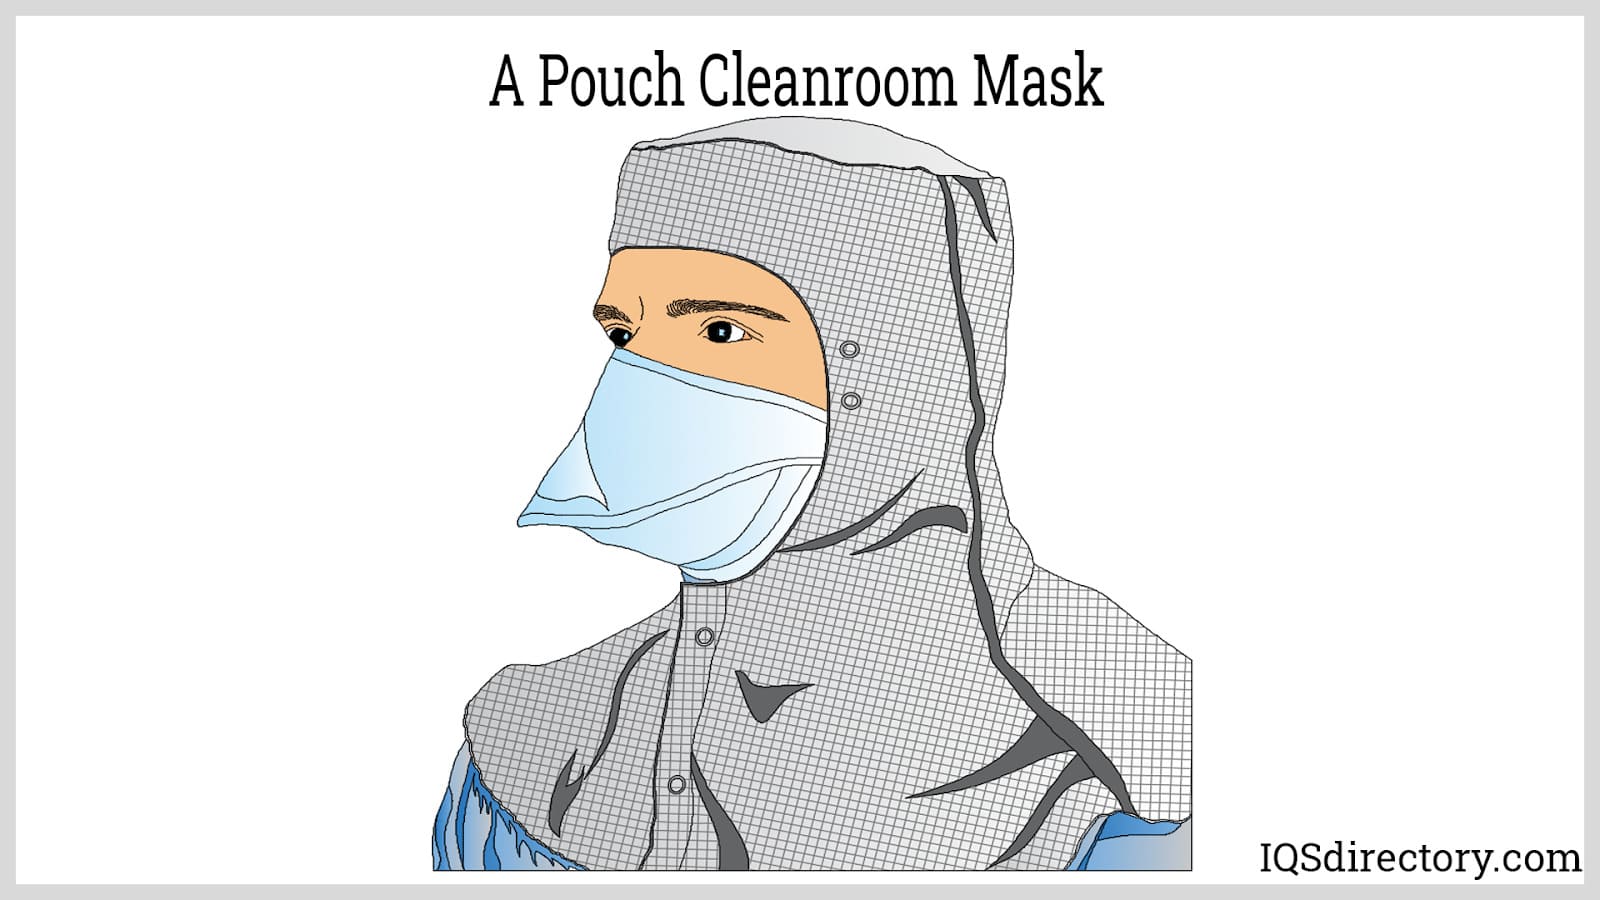 A Pouch Cleanroom Mask